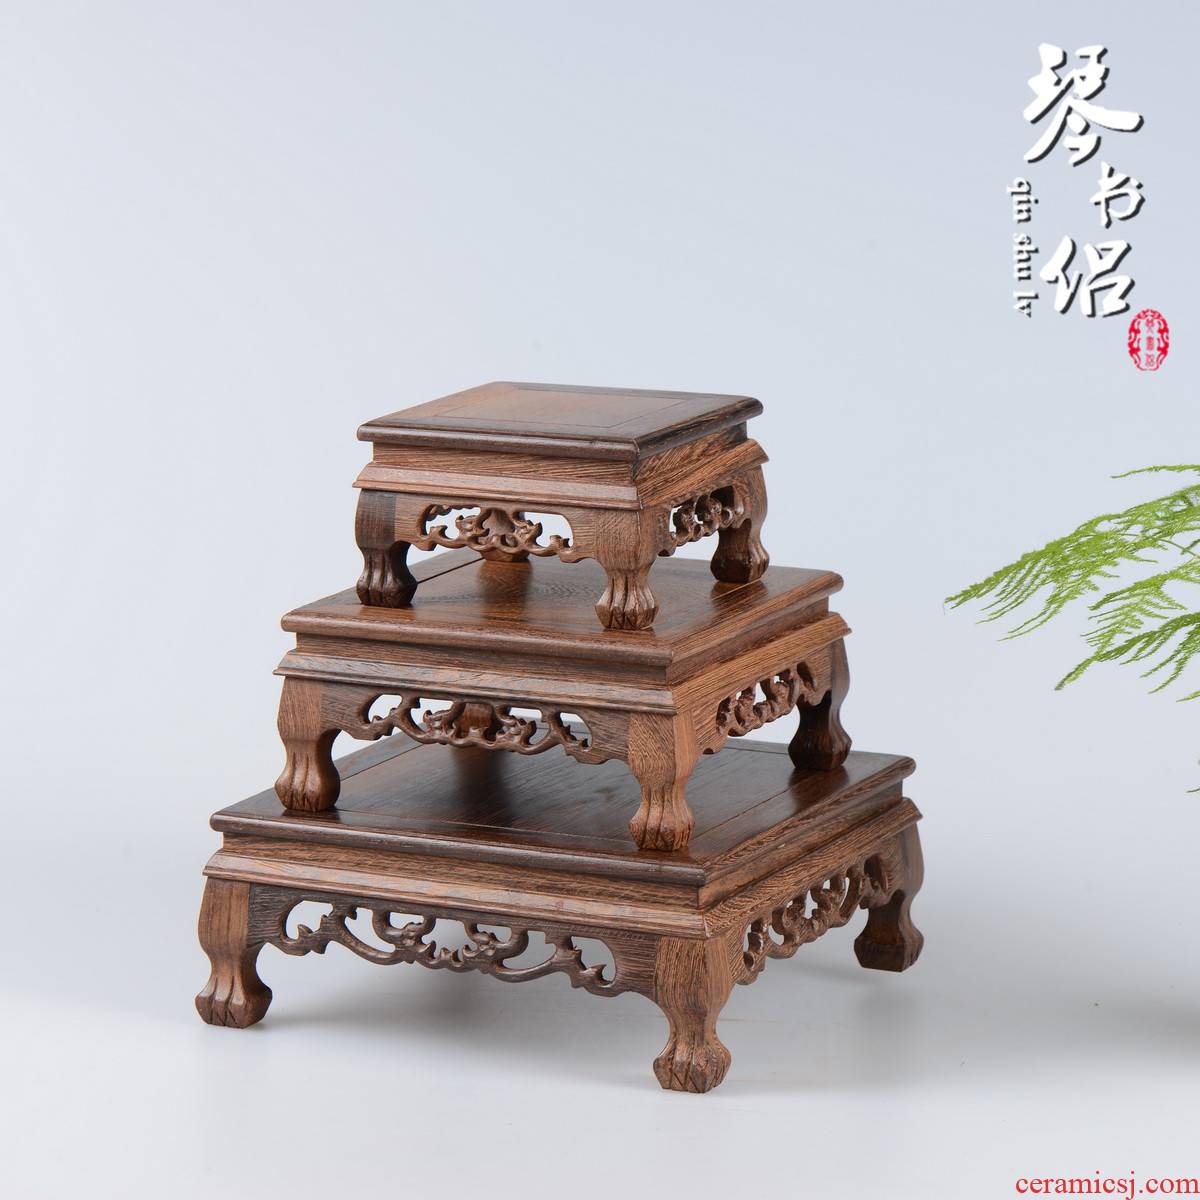 Chicken wings wood crafts square mahogany base it stone, jade antique solid wood antique porcelain base